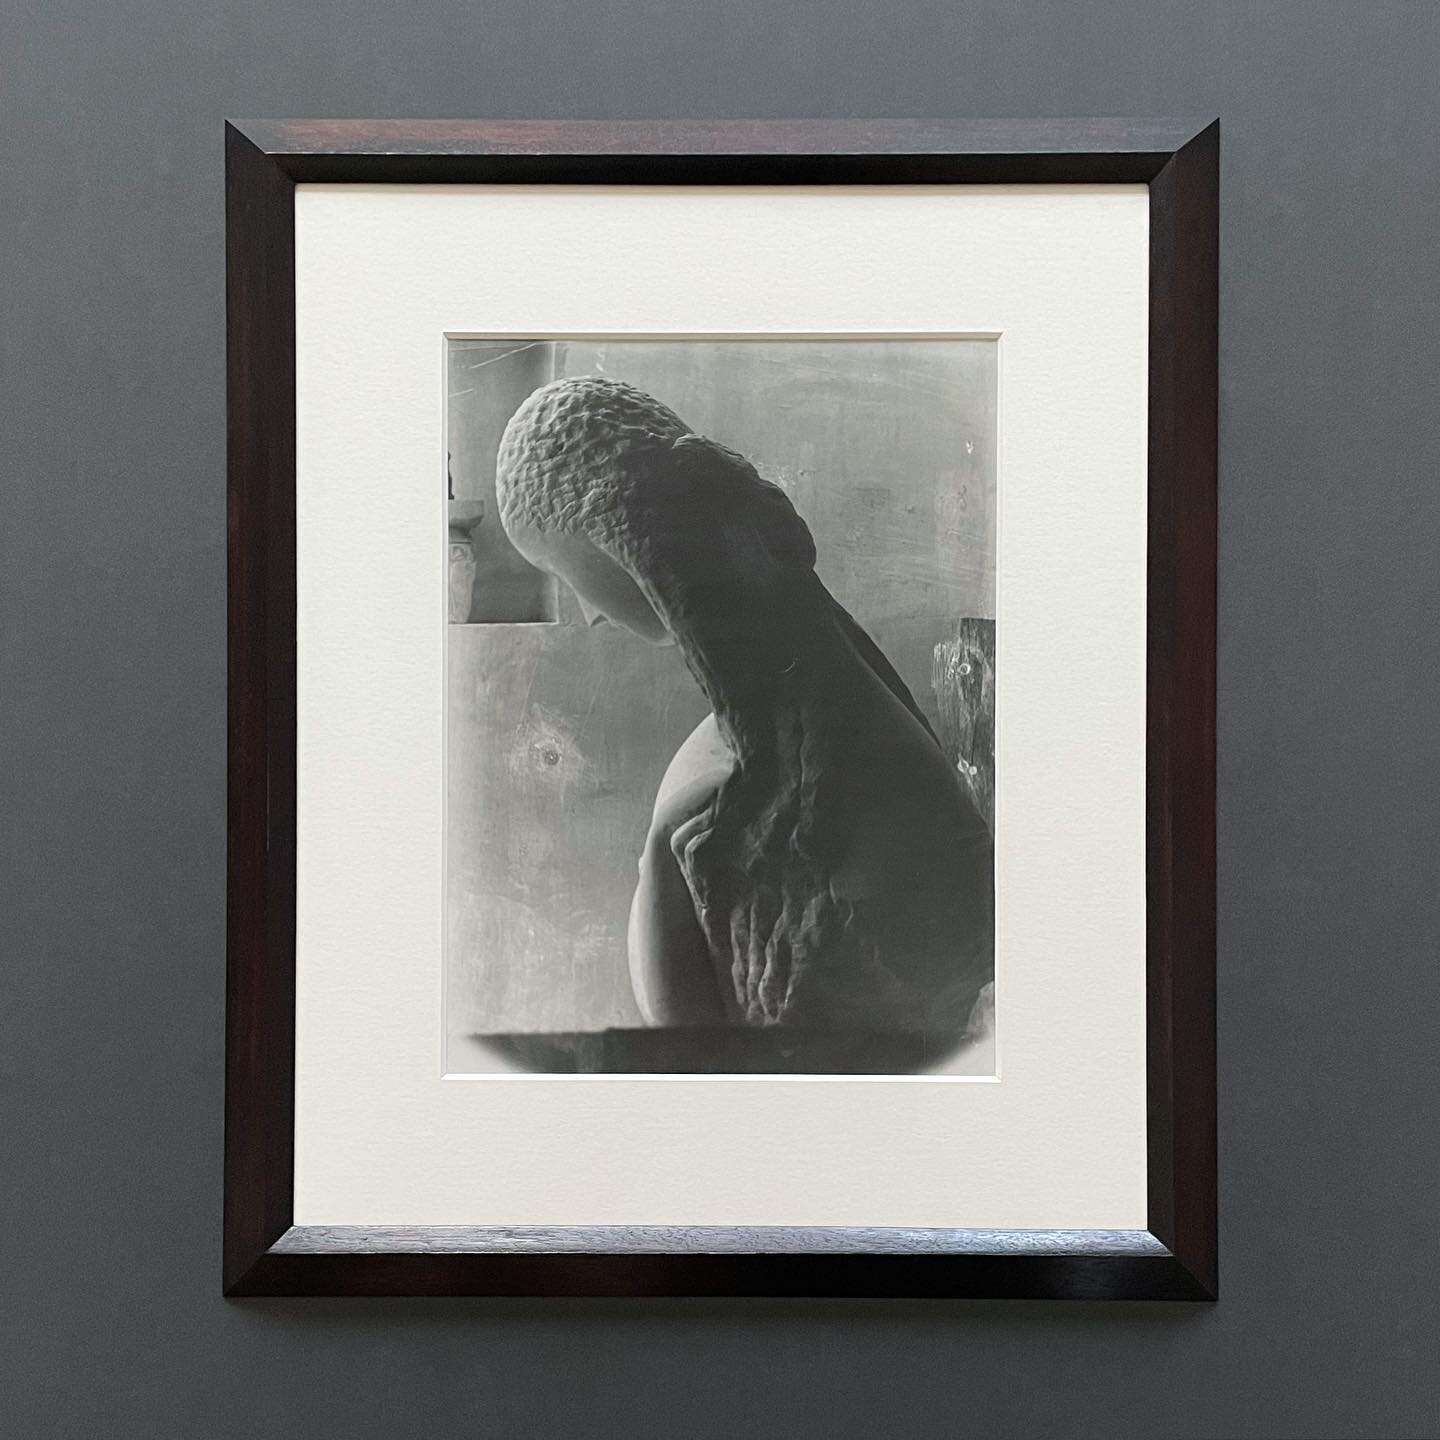 Photograph by #Br&acirc;ncuși 
Framed in a custom profile angled frame, stained dark brown, polished and waxed